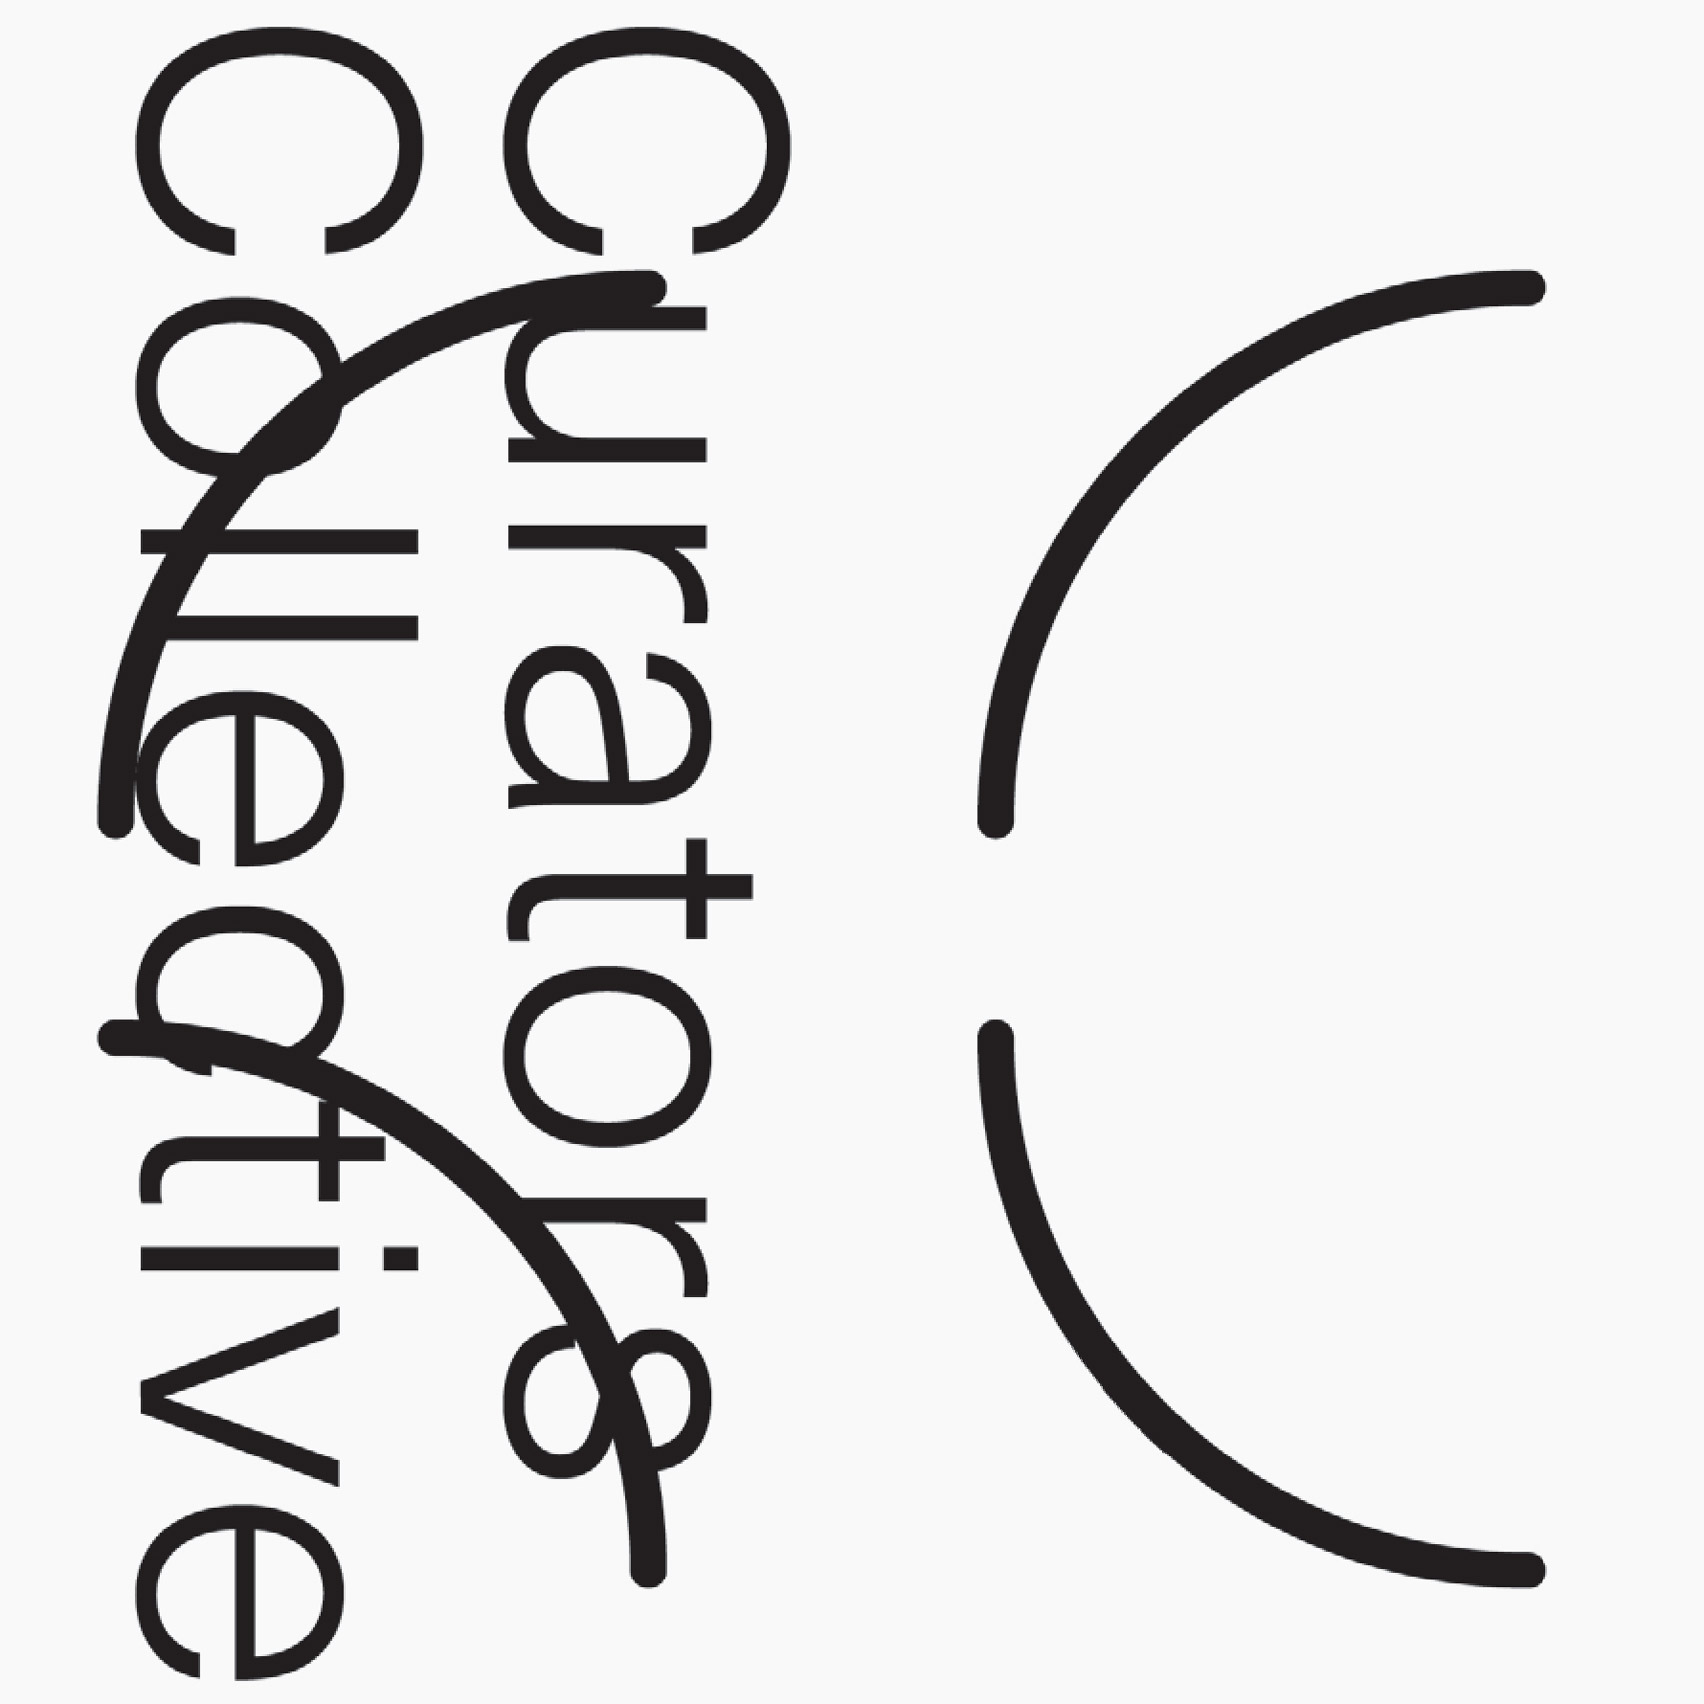 The Curators Collective logo